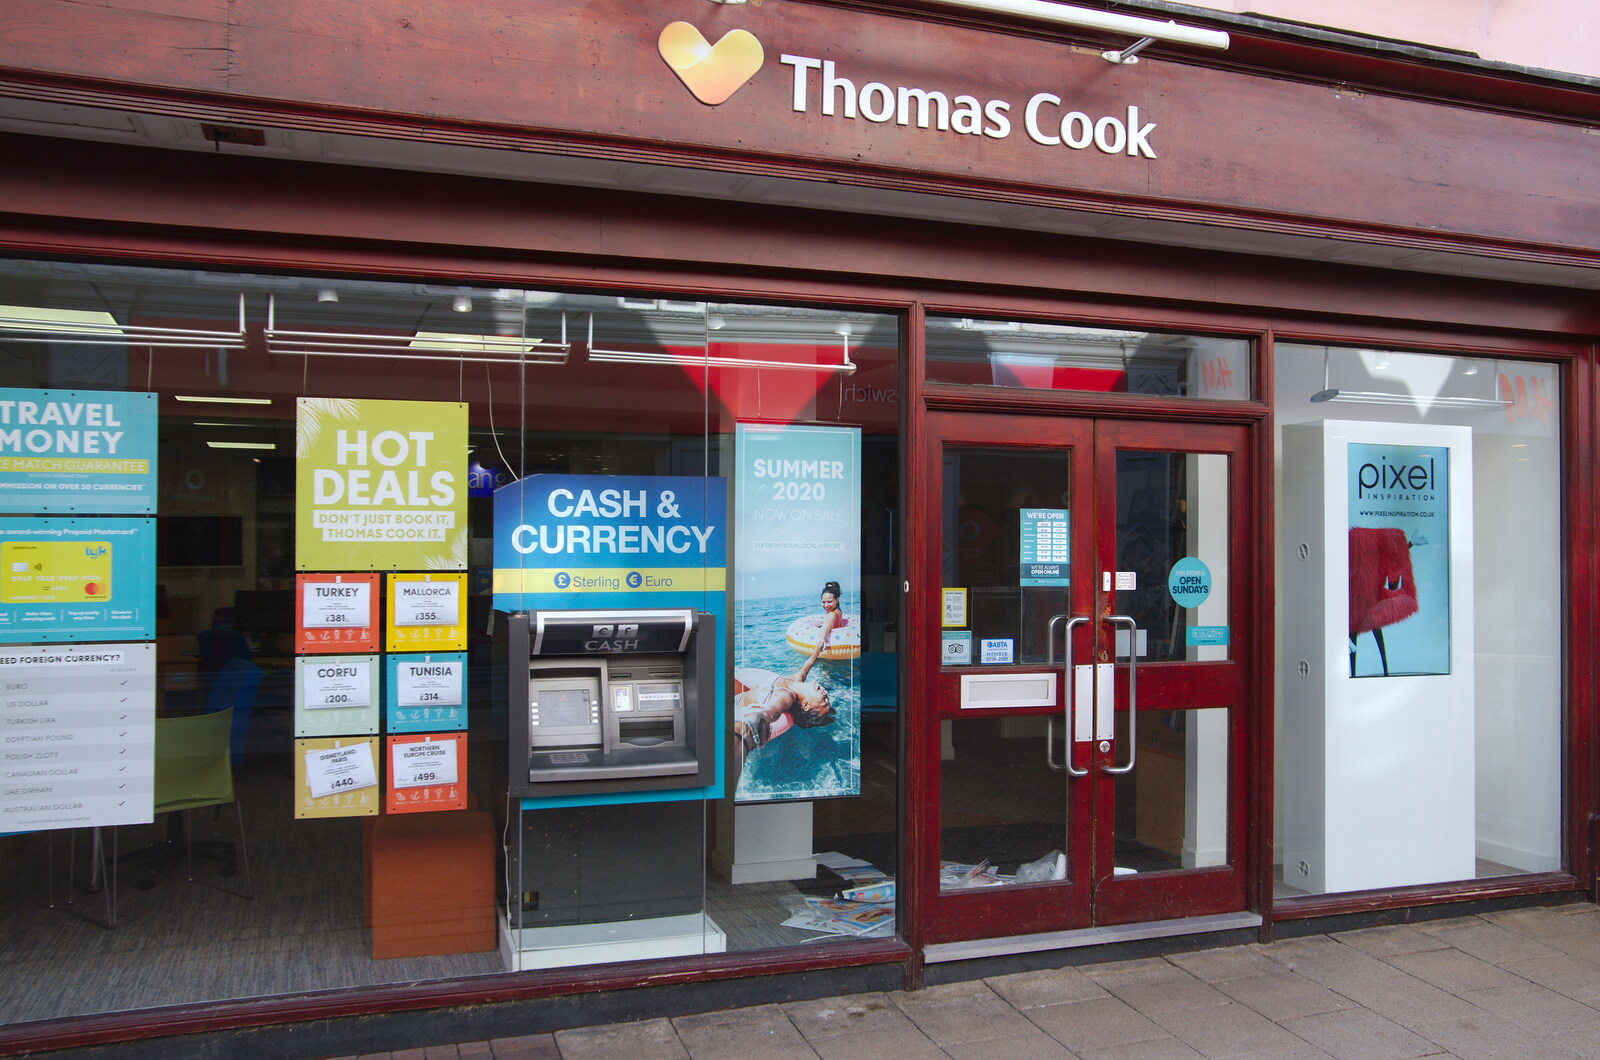 High Street legend Thomas Cook goes bust from Exam Day Dereliction, Ipswich, Suffolk - 13th November 2019